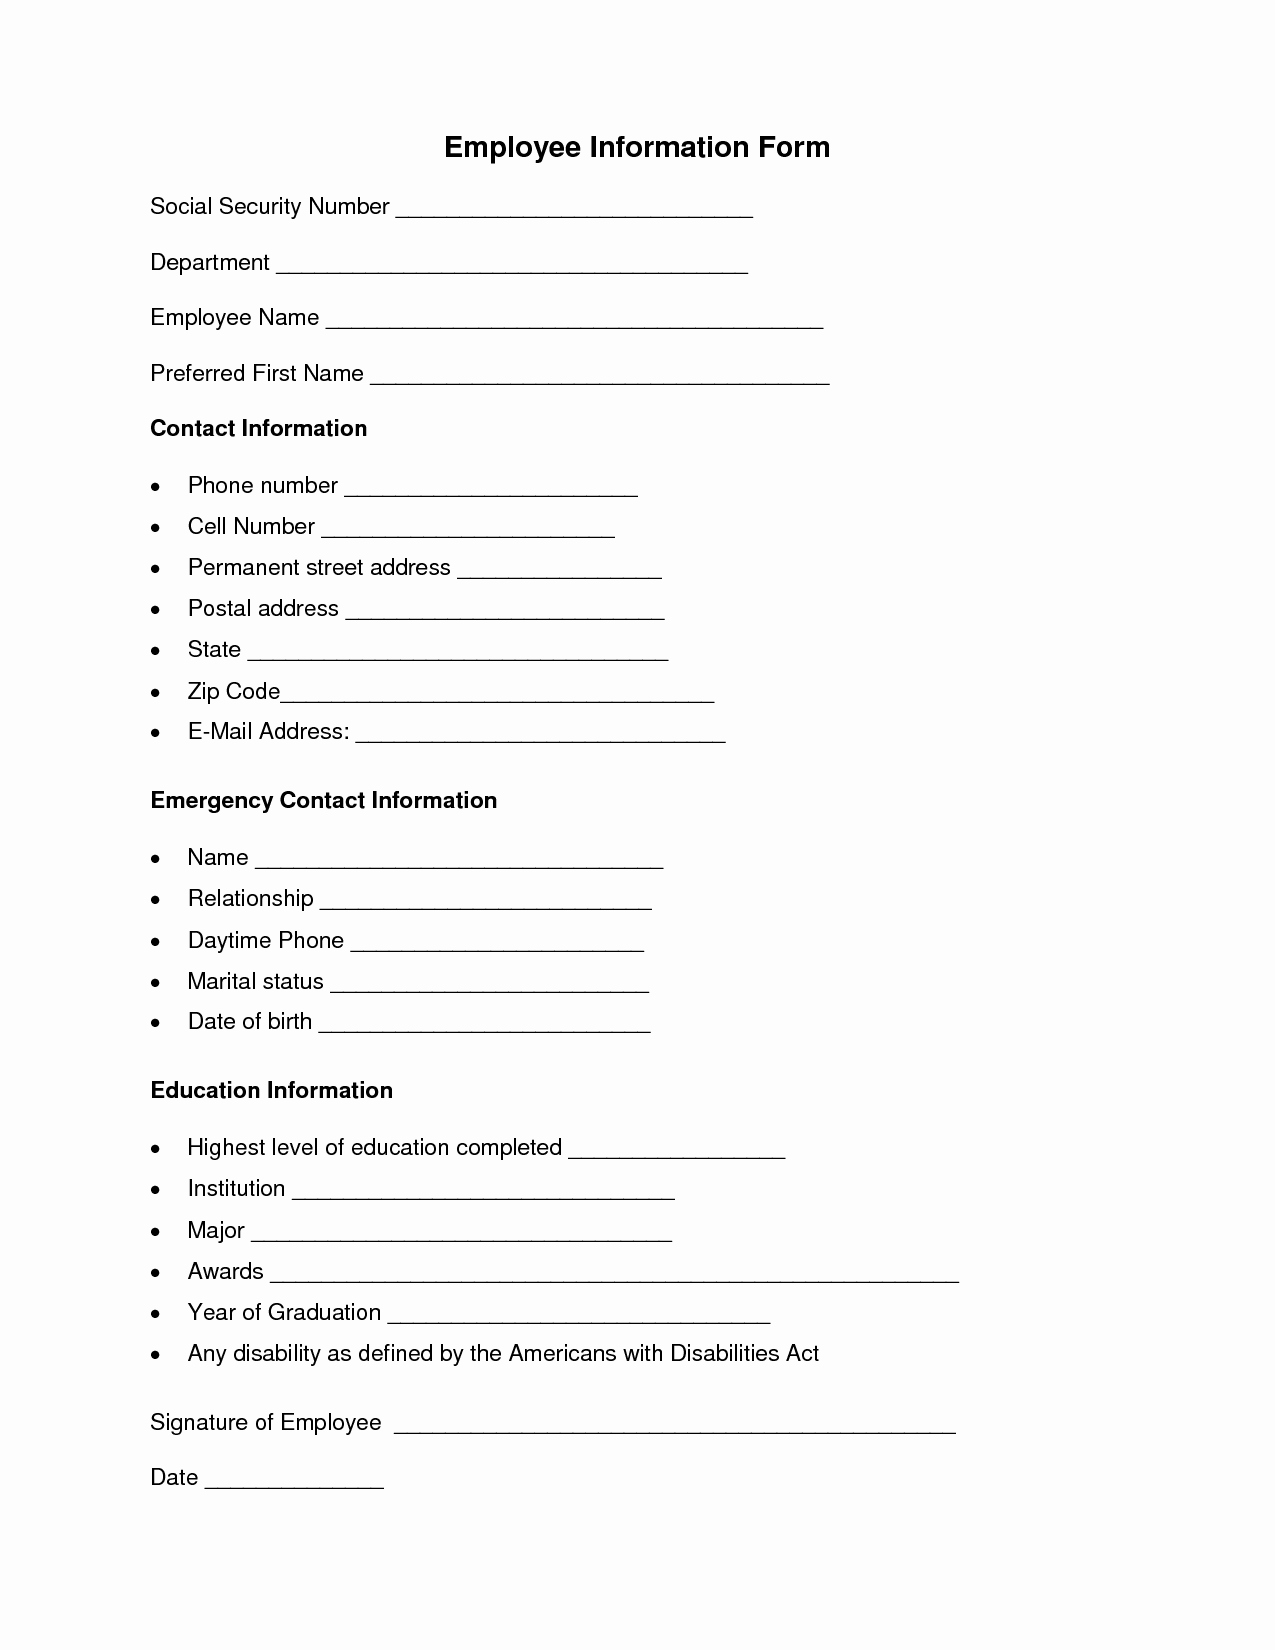 Personal Information form Template New Employee Information form Employee forms